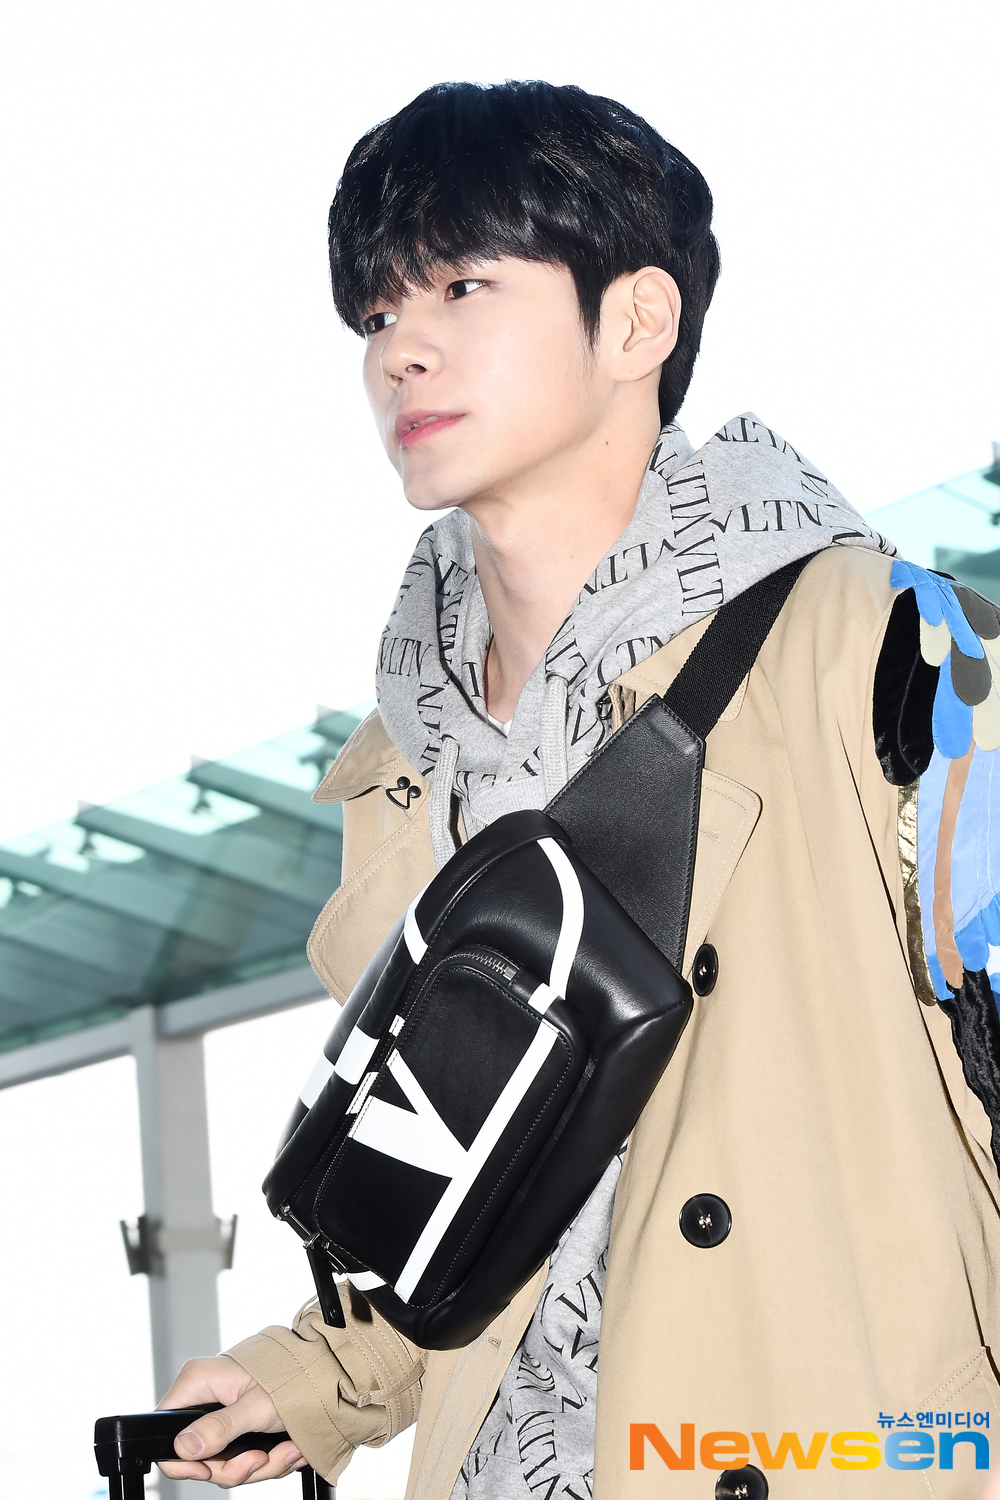 <p>Wanna One(WANNAONE) former member of the Ong Seong-wu 3 14 am Incheon Jung-operation in Incheon International Airport through brand promotions and events to attend car Hong Kong into the United States.</p><p>Wanna One(WANNAONE) former member of the Ong Seong-wu with airport fashion and Hong Kong into the United States.</p>